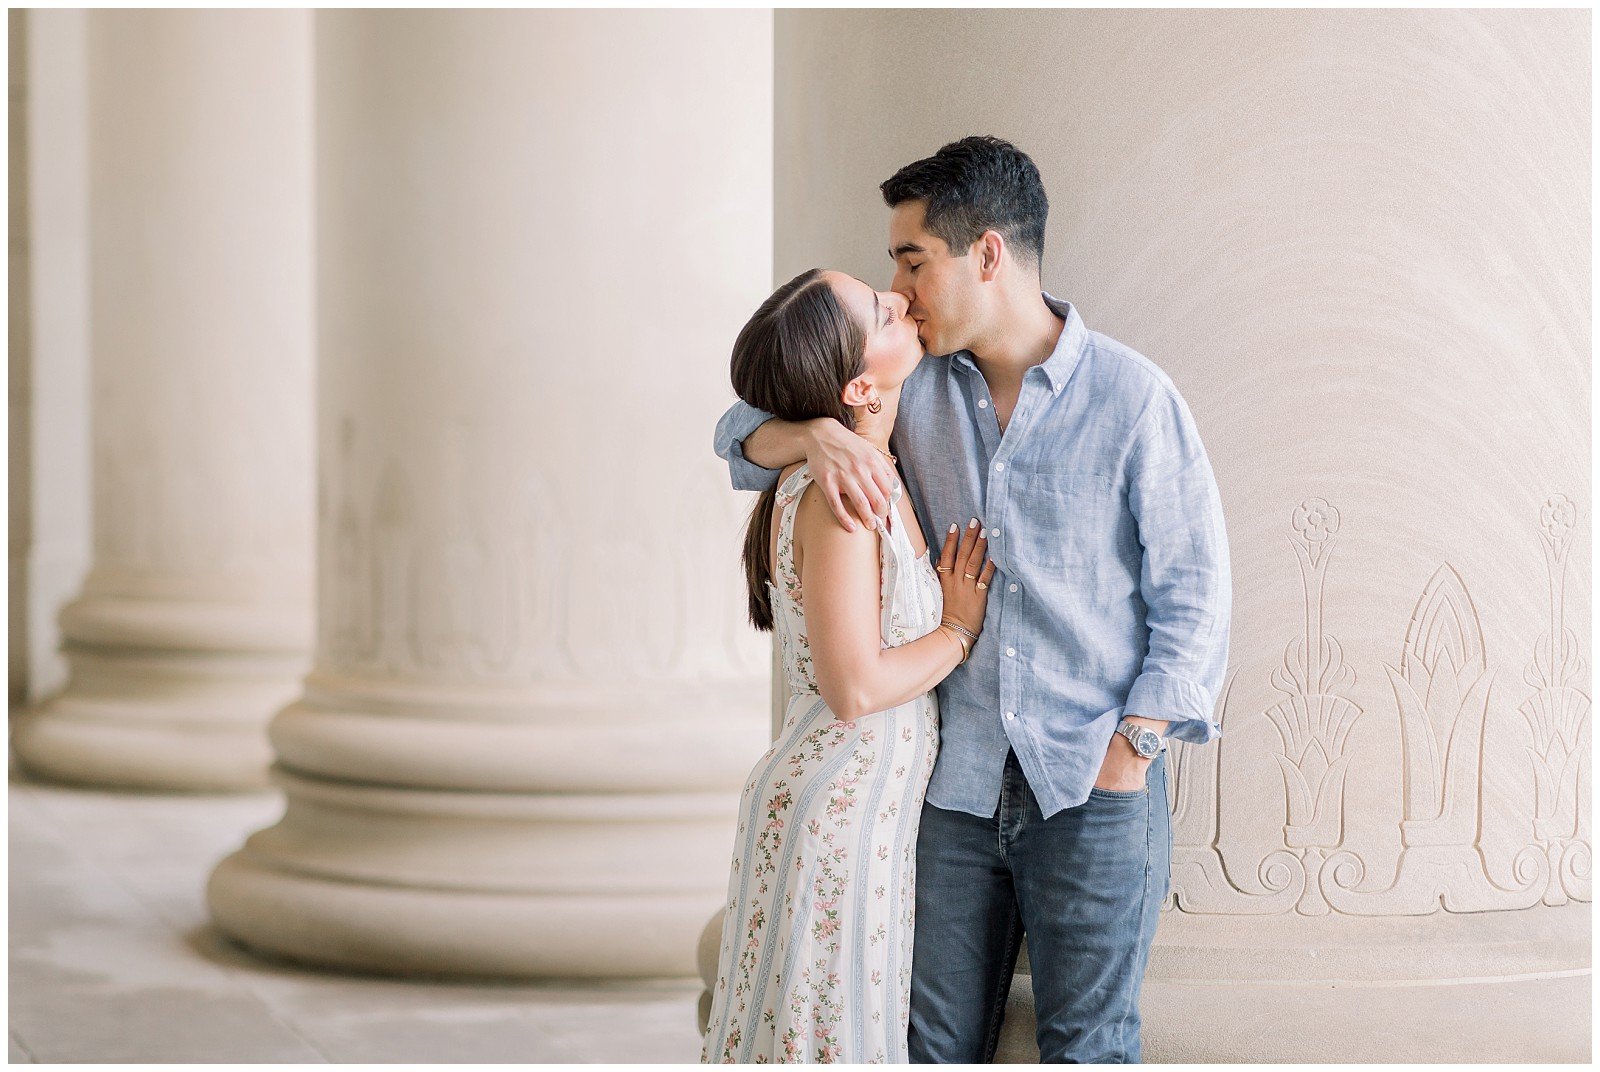 Summer-Engagement-Photos-at-The-Nelson-Atkins-K+S-0522-Elizabeth-Ladean-Photography-photo-_6493.jpg